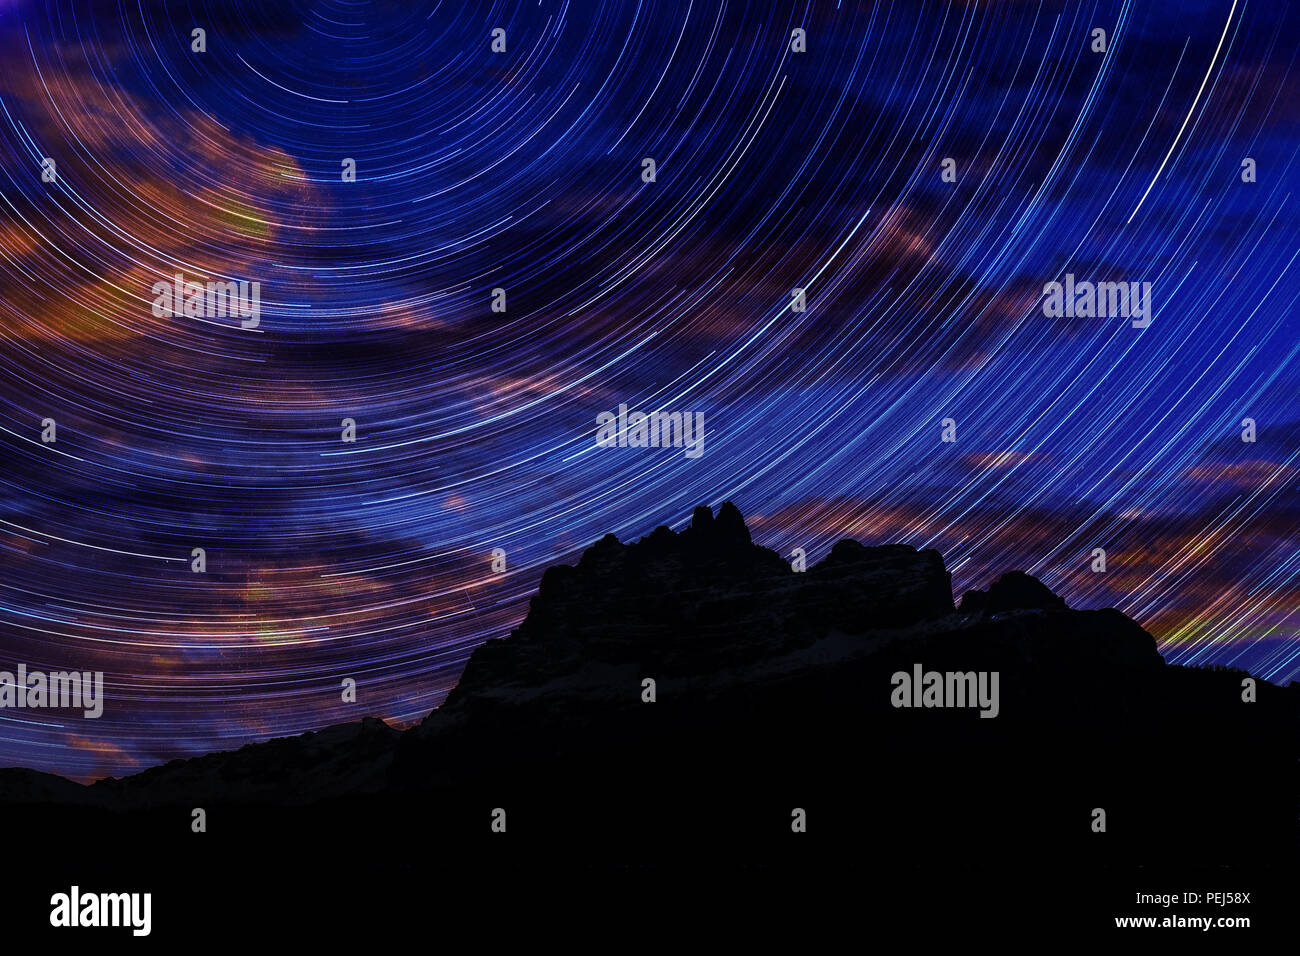 Long exposure image showing Night sky star trails over mountains Stock Photo